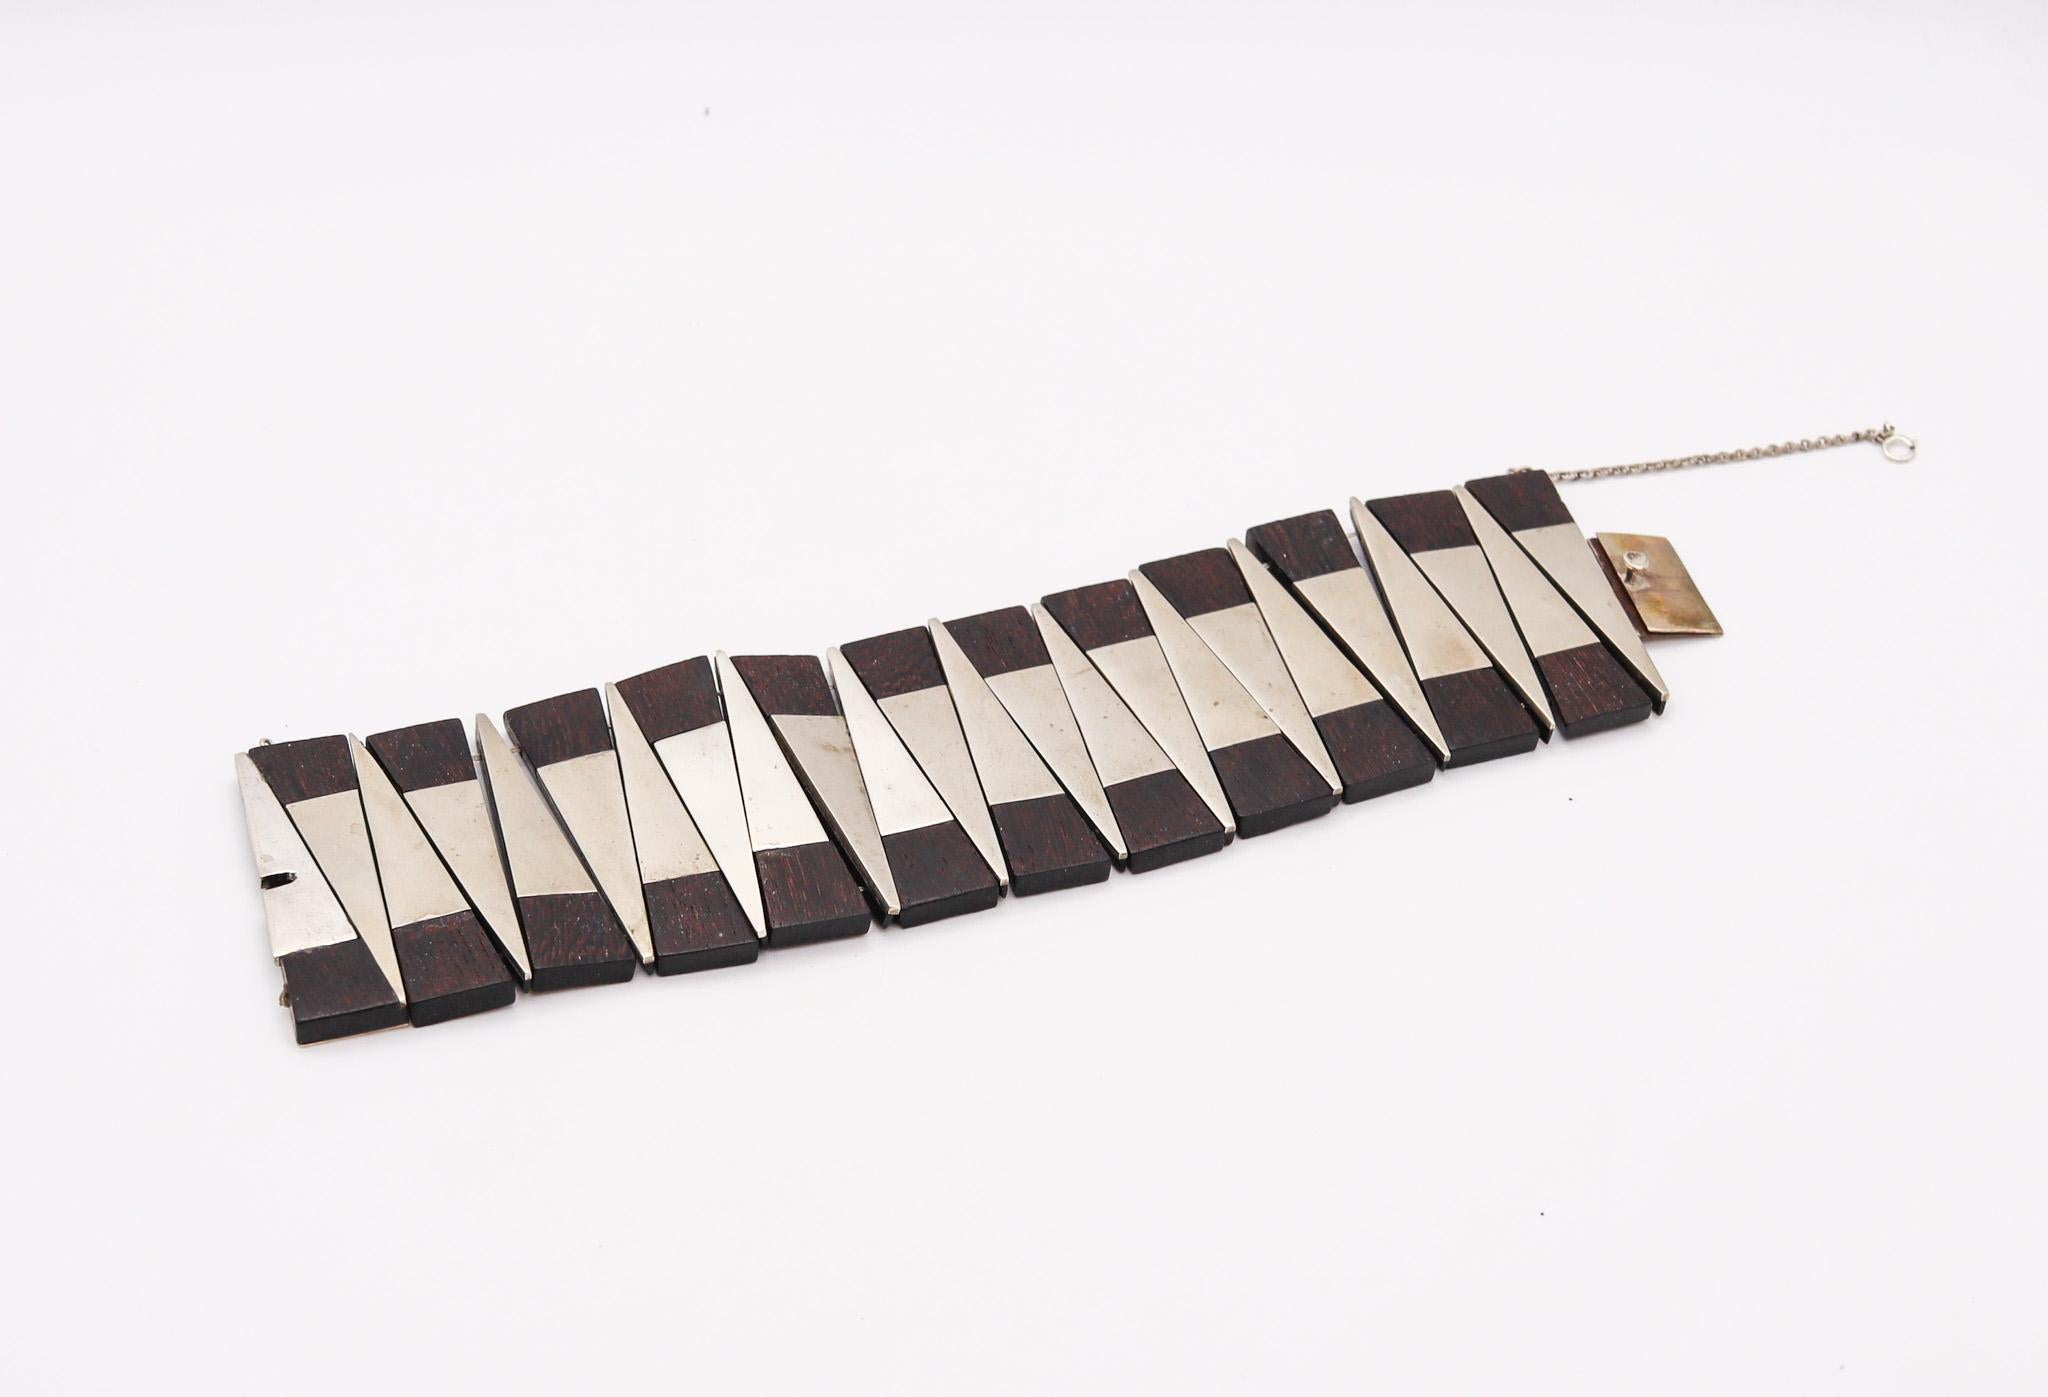 Geometric bracelet designed by Los Castillo.

Beautiful and rare bracelet, created in the city of Taxco, Mexico during the art deco period, back in the 1930. This exceptional flexible bracelet has been designed with geometric patterns at the iconic